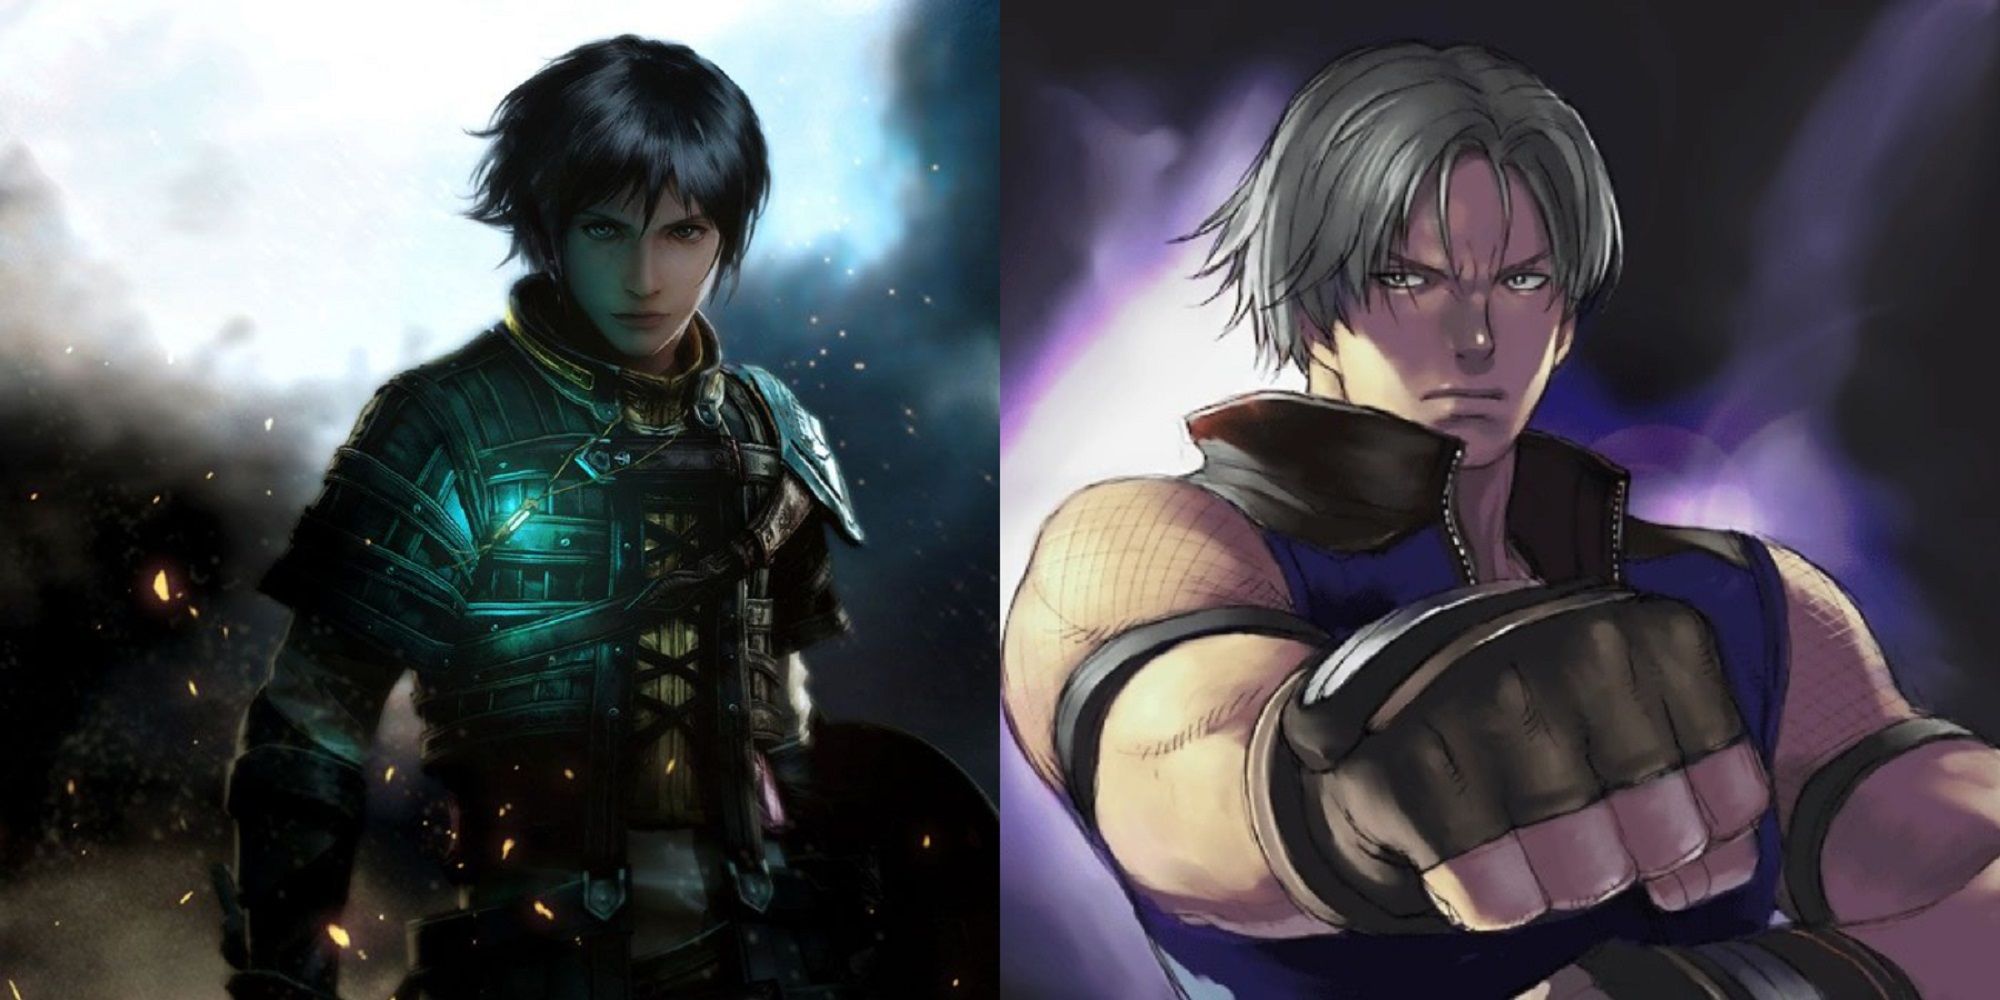 Split image of promotional artwork of Rush Sykes from The Last Remnant and Lee Chaolan from the prologue of Tekken 5